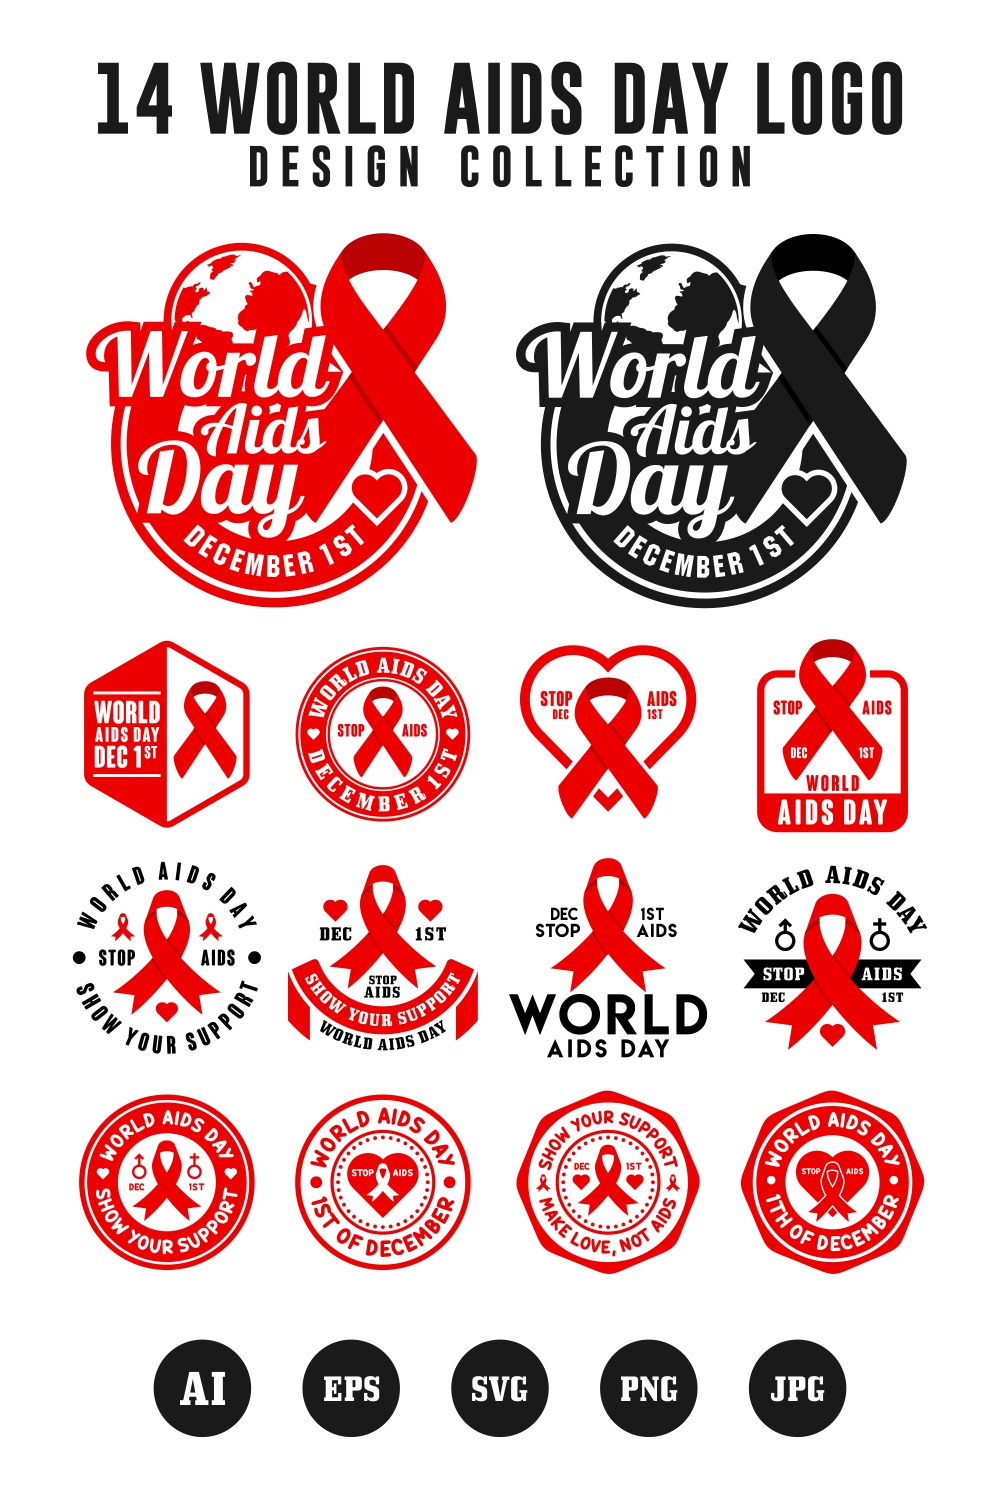 14 World Aids Day logo collection - $12 pinterest preview image.